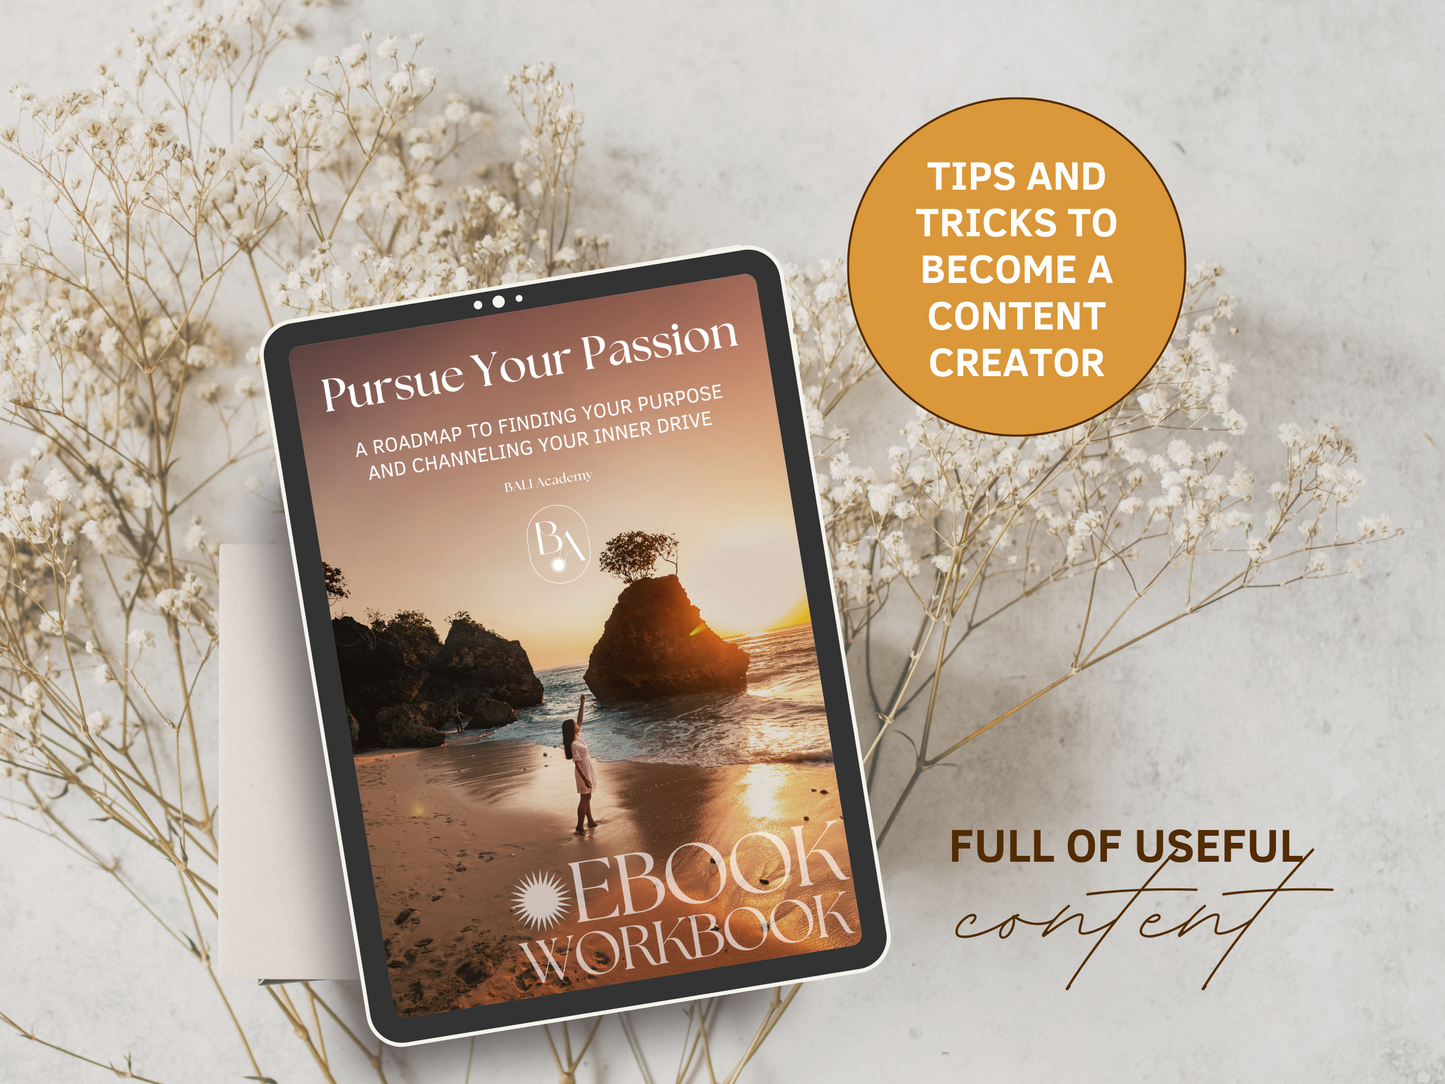 Pursue Your Passion PLR eBook & Workbook - The roadmap to finding your purpose and channeling your inner drive. It's full of useful content and tips and tricks to become a content creator. It's editable in Canva.